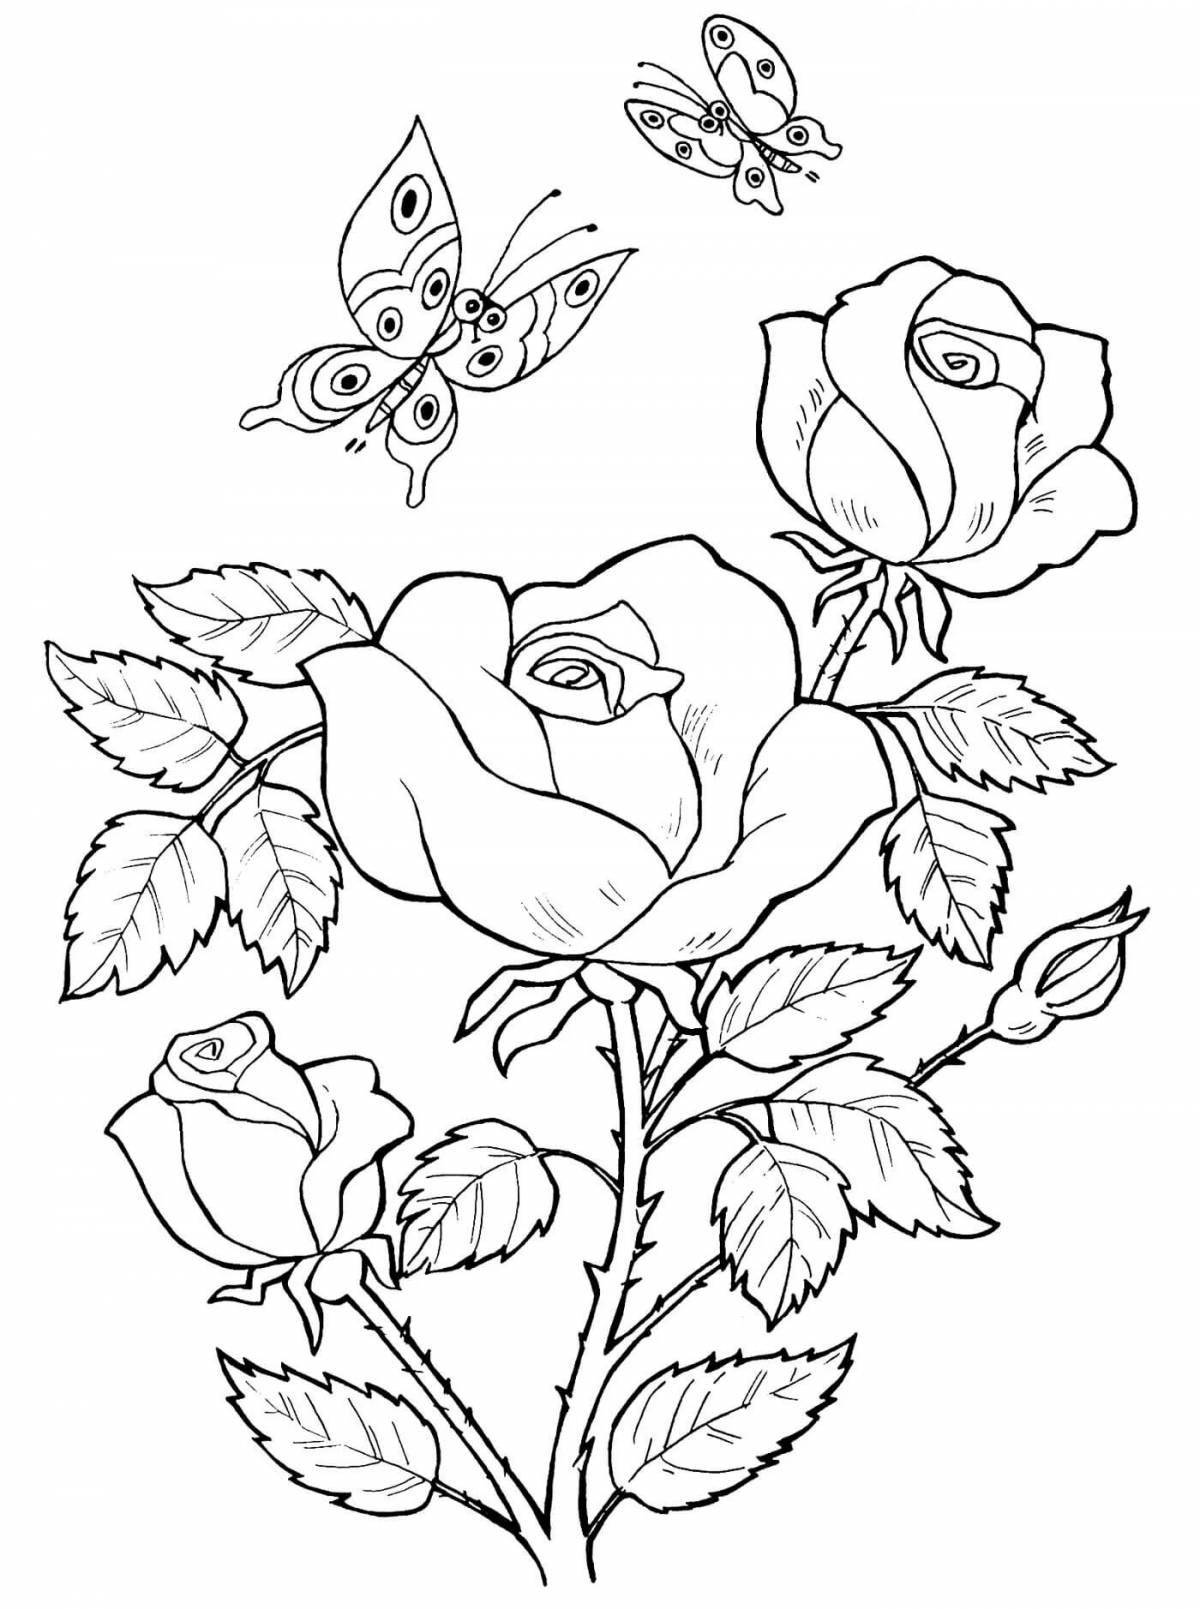 Glitter rose coloring book for 5-6 year olds